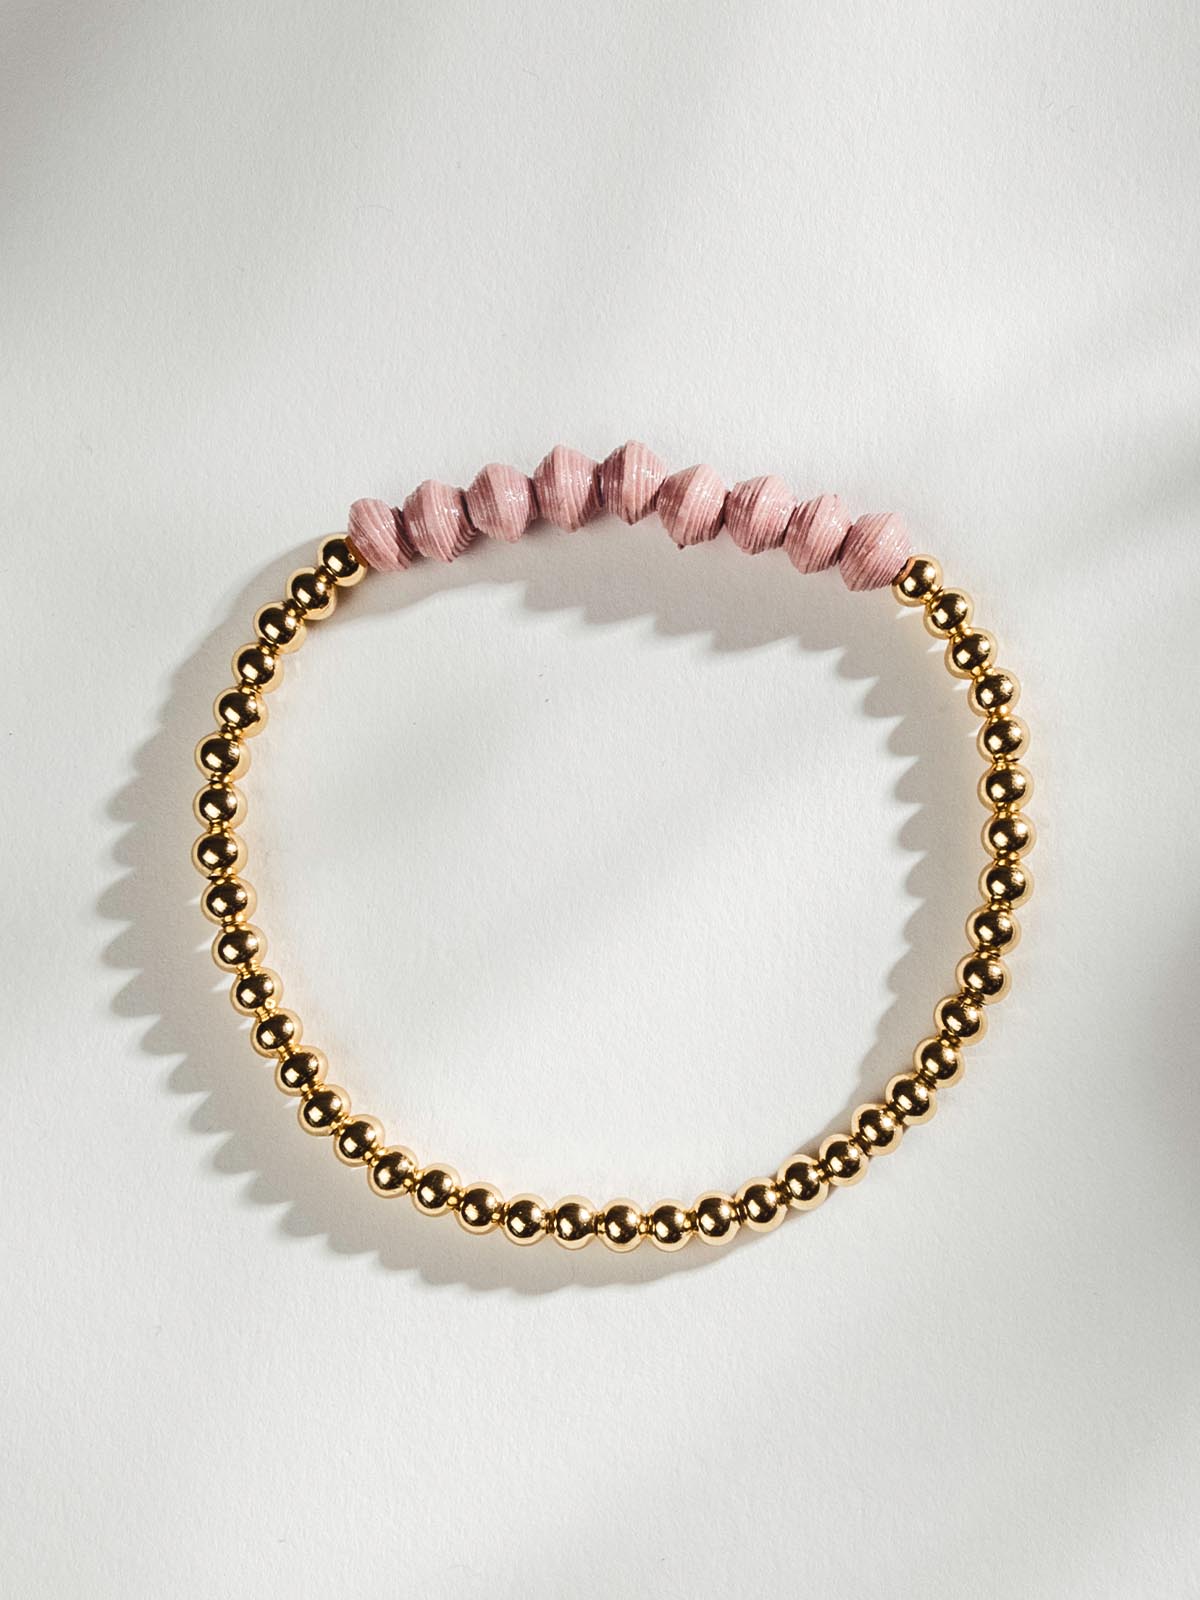 Golden beaded bracelet with nine pink beads on a white surface.